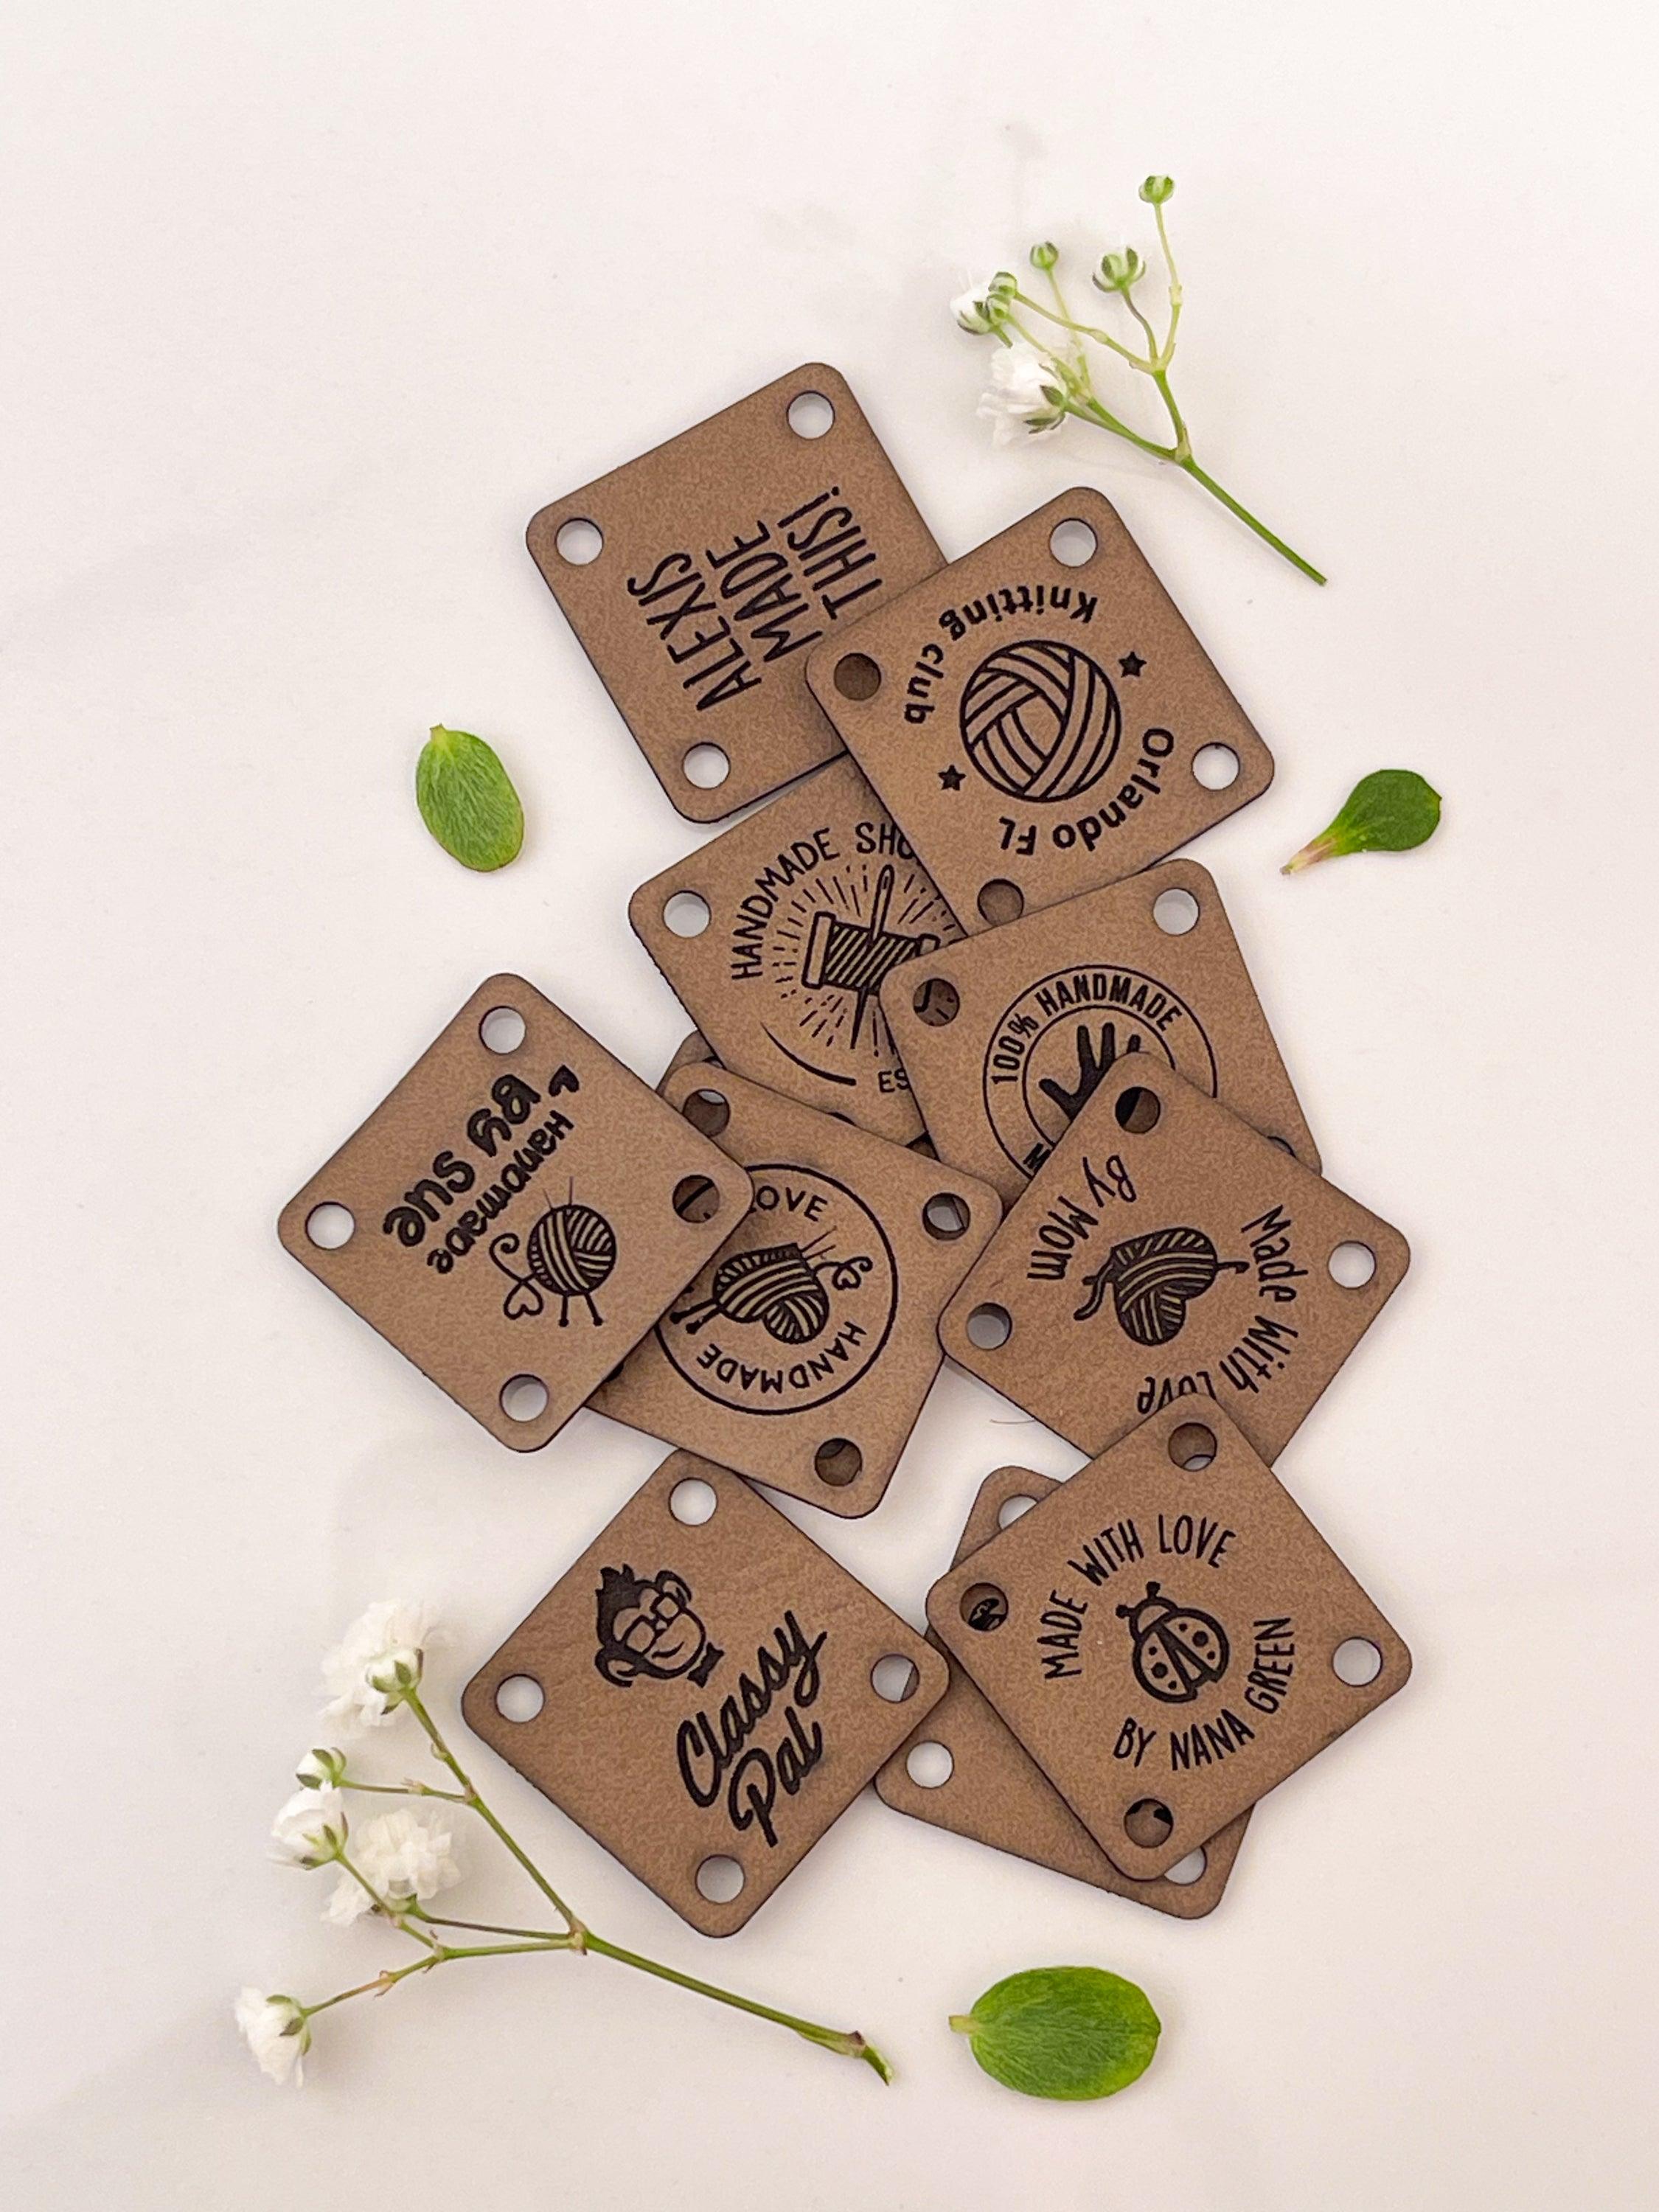  Faux leather labels for handmade items, vegan leather